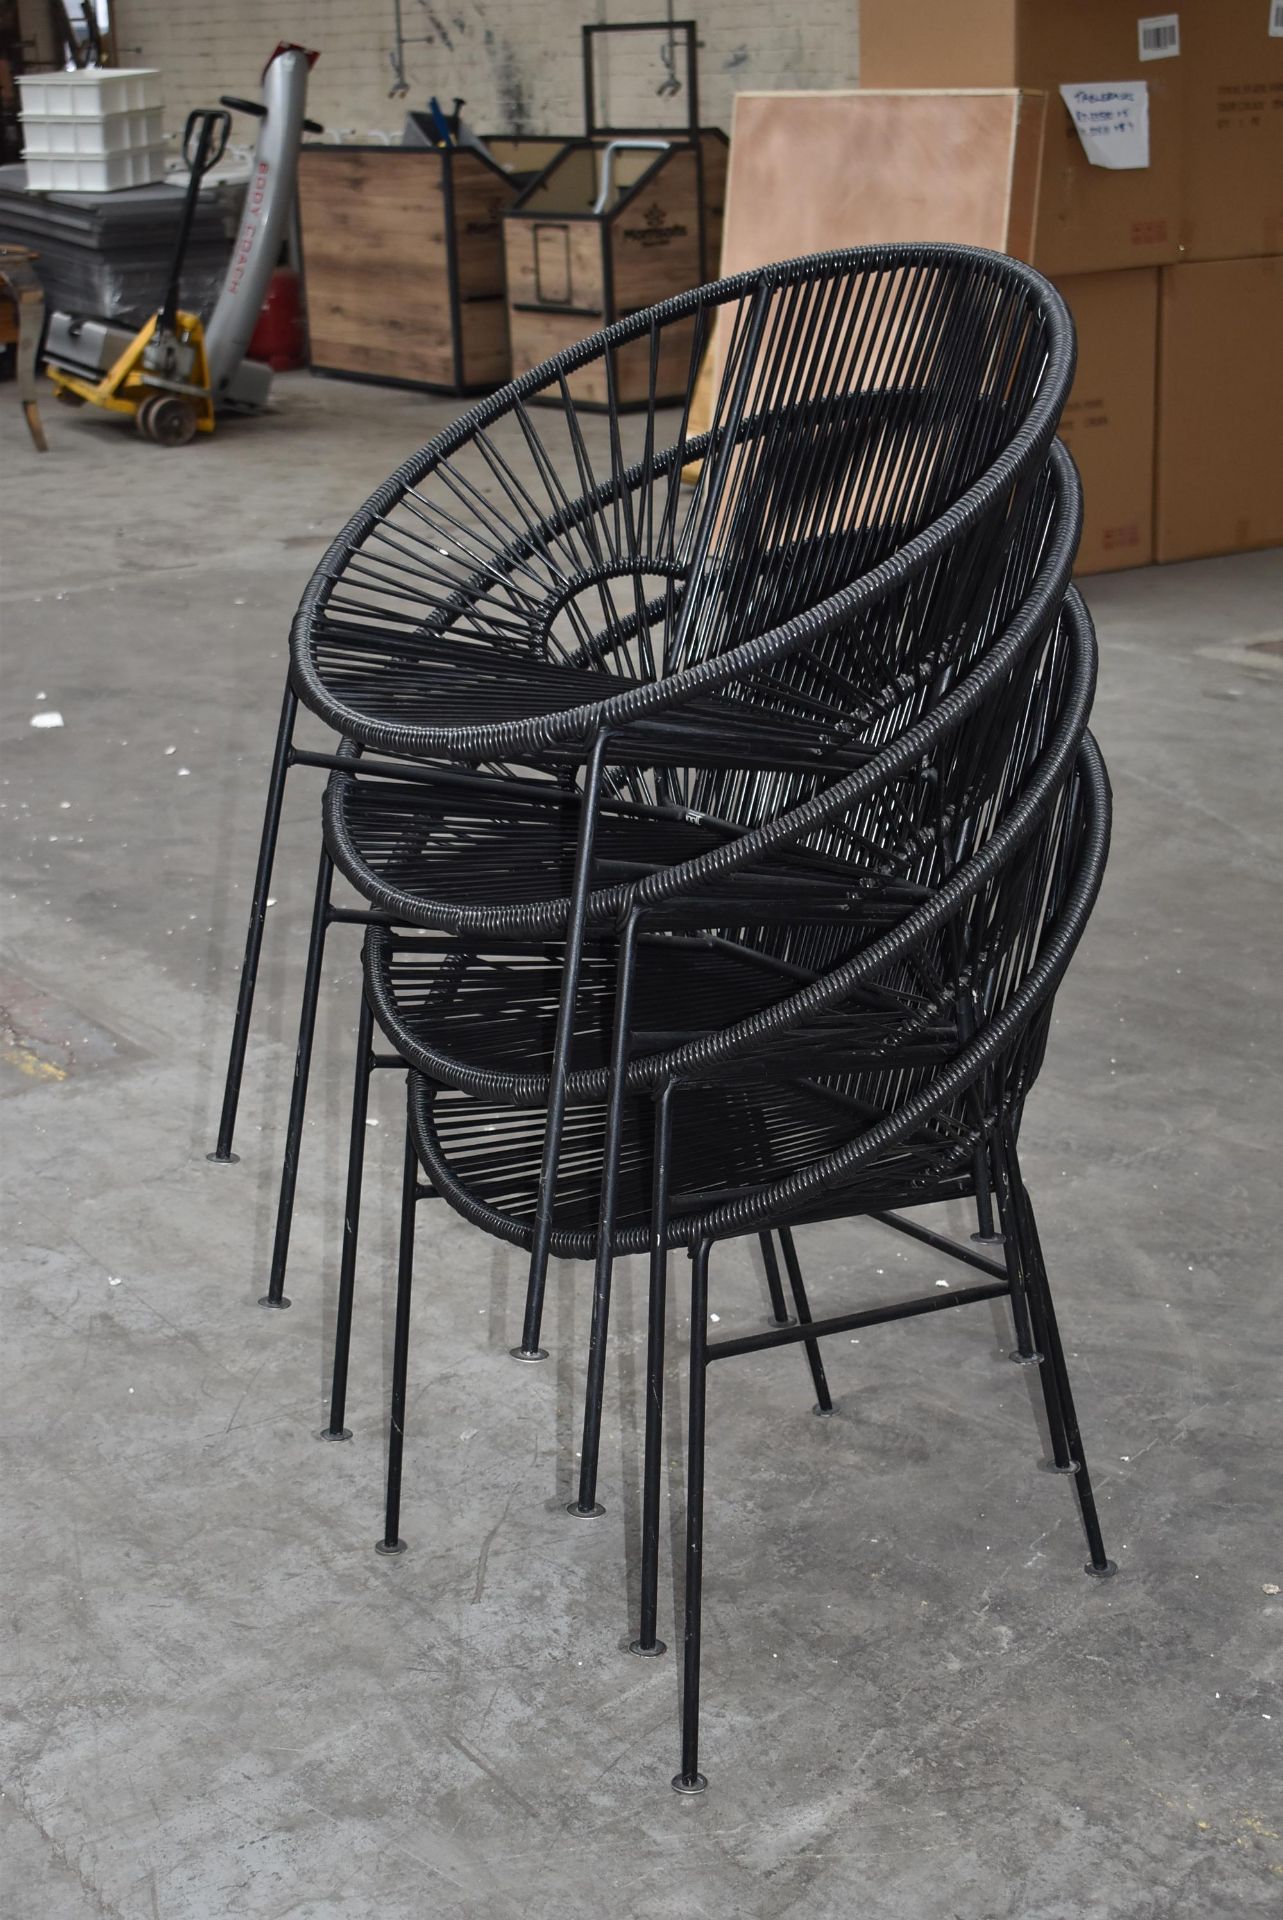 4 x Innit Designer Chairs - Acapulco Style Chairs in Black Suitable For Indoor or Outdoor Use - - Image 8 of 10